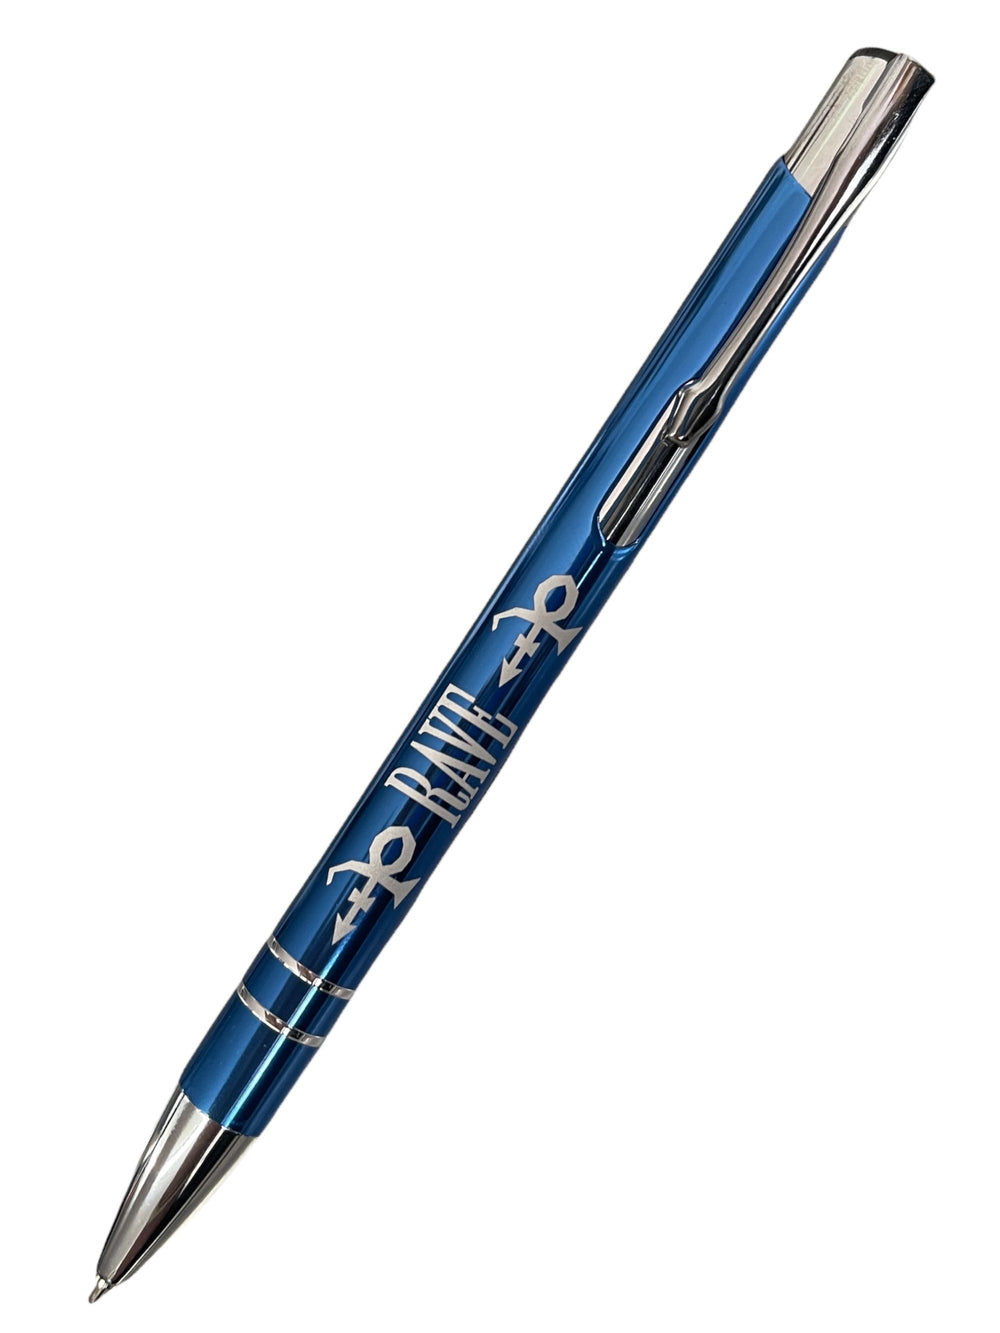 Prince – O(+>Official Xclusive RAVE Love Symbol Estate Authorised Engraved Metal Pen